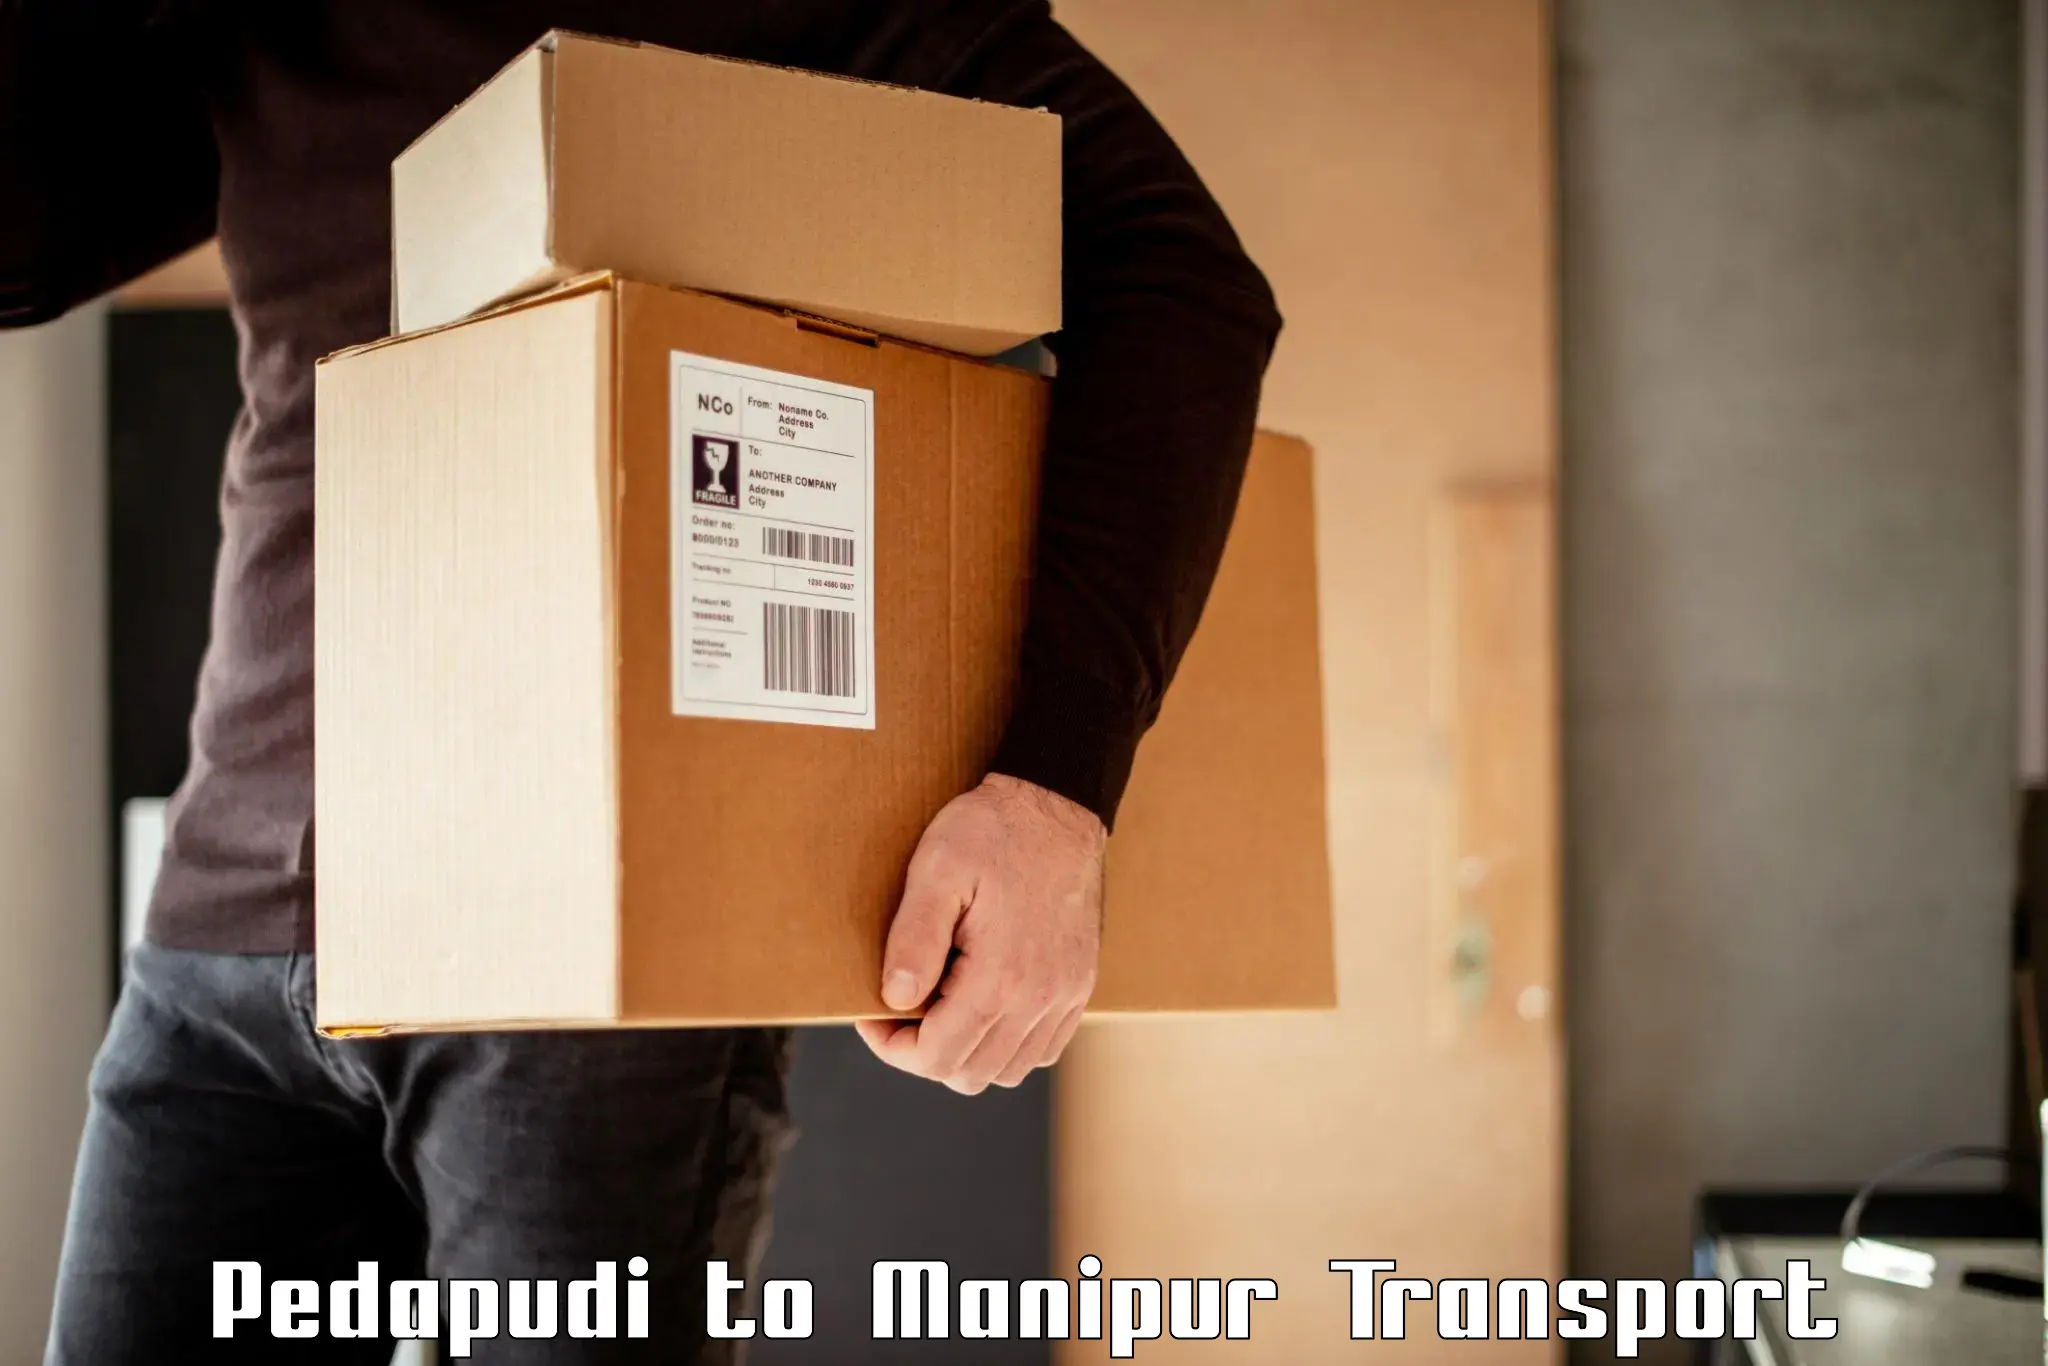 Two wheeler parcel service Pedapudi to Imphal